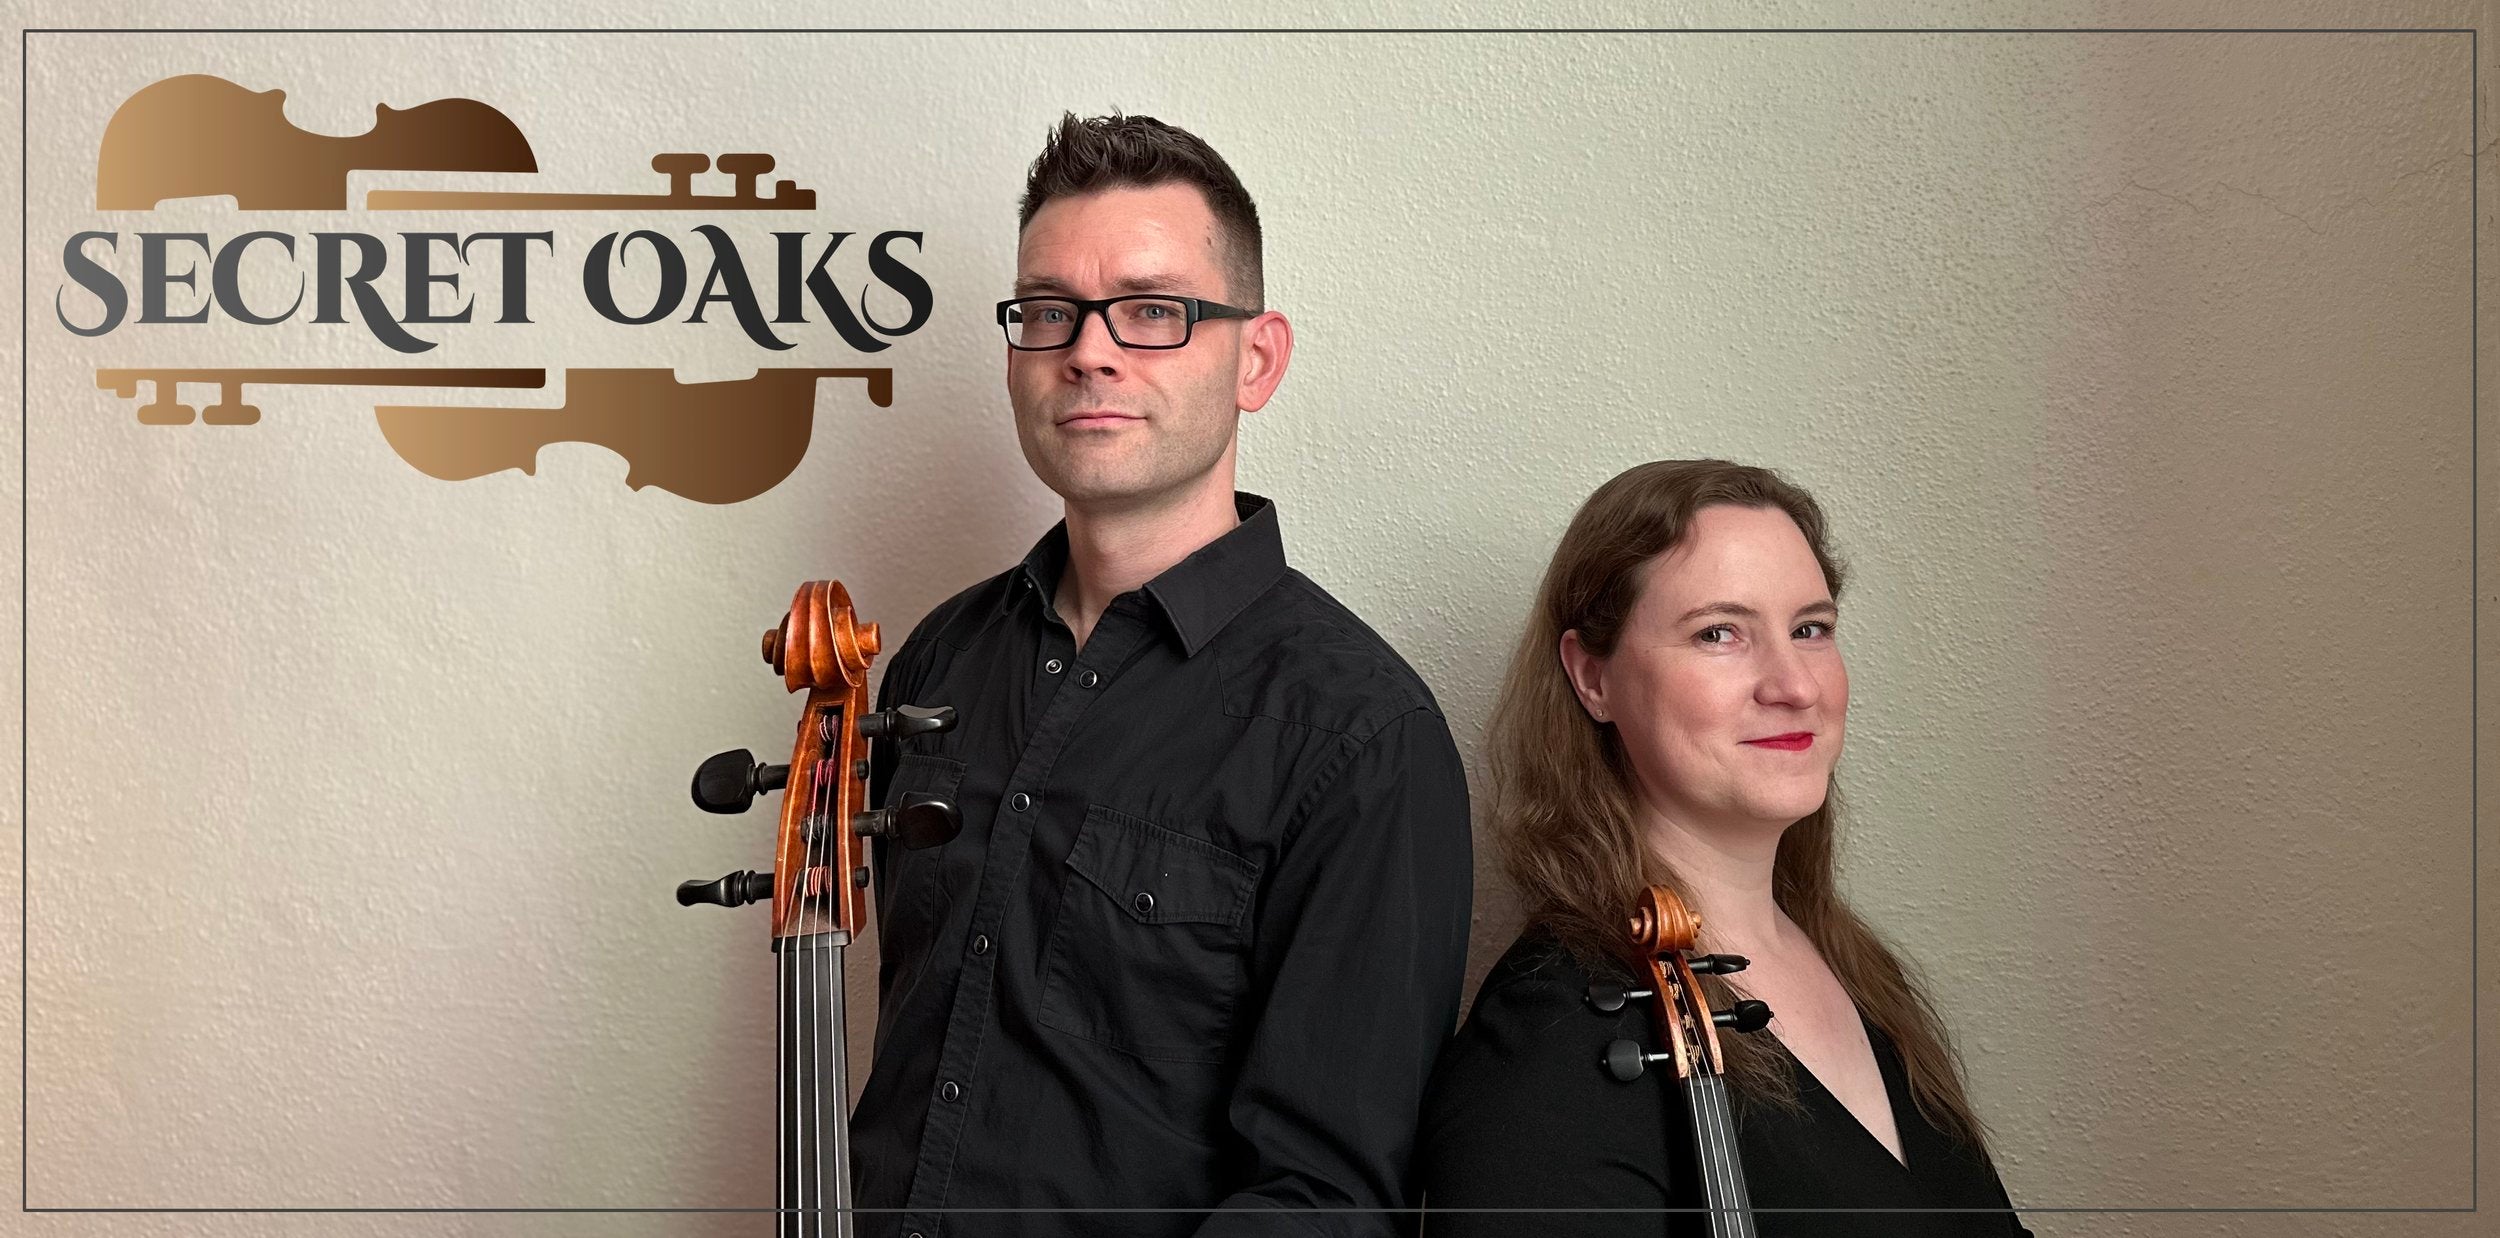 Luther Strings Presents: Secret Oaks - Concert Ticket Reservation - Saturday, June 8th at 7:00pm